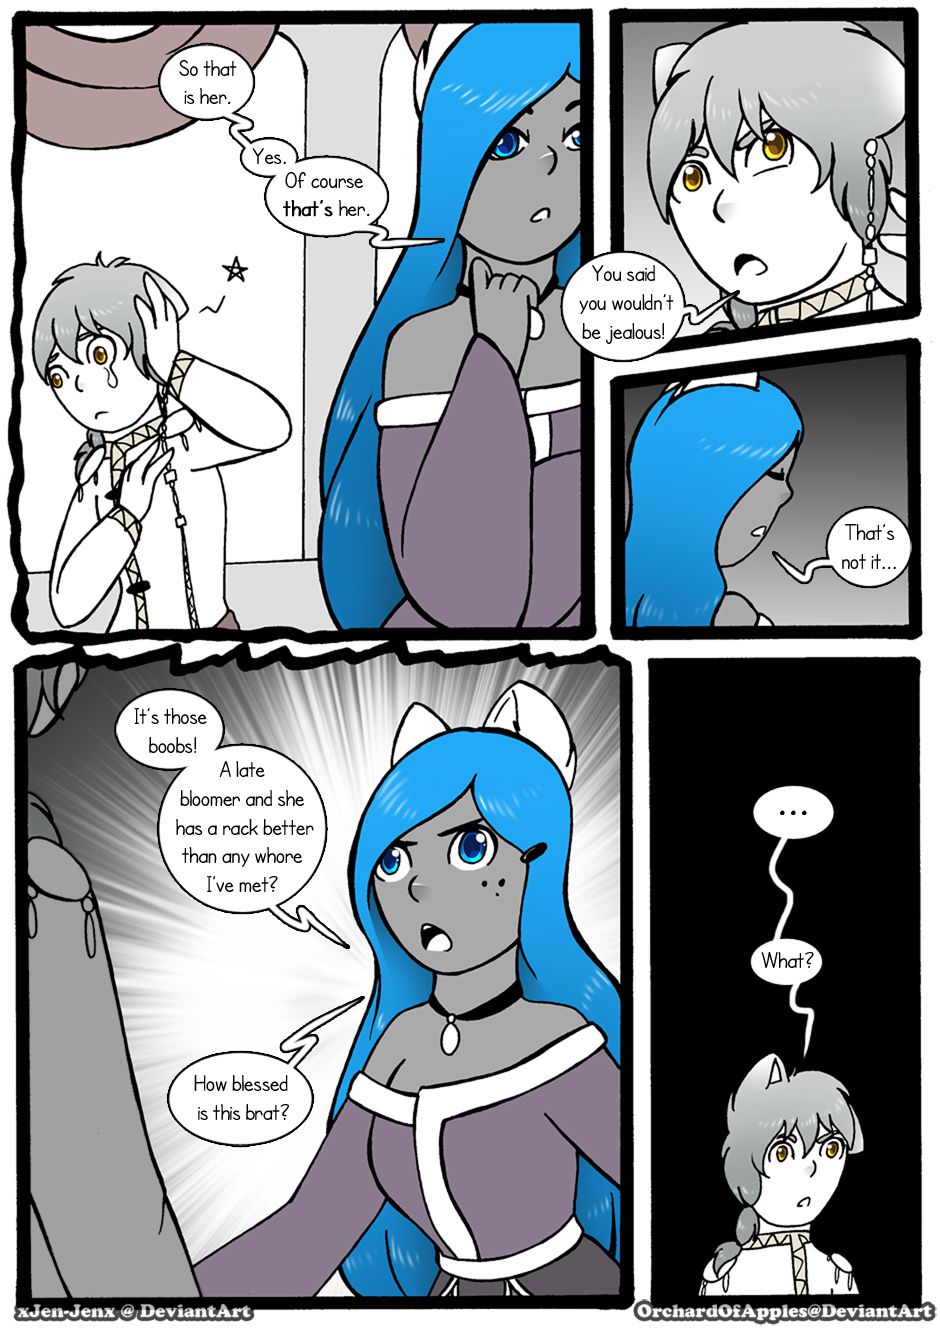 [Jeny-jen94] Between Kings and Queens [Ongoing] 196